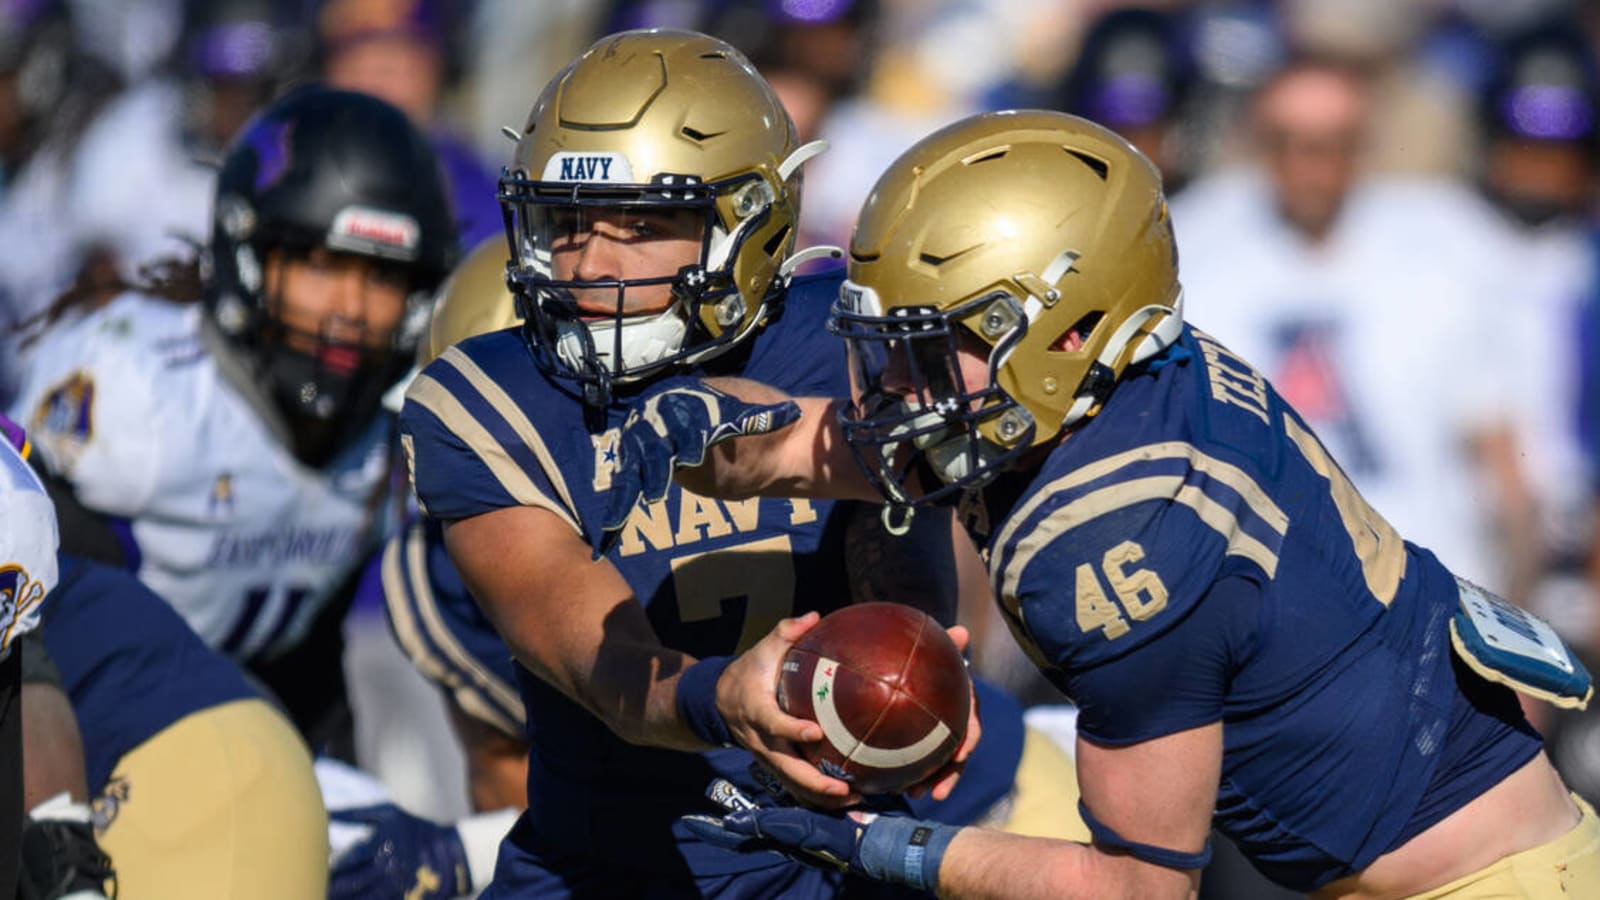 Watch: Navy releases incredible uniforms for annual Army-Navy game ...